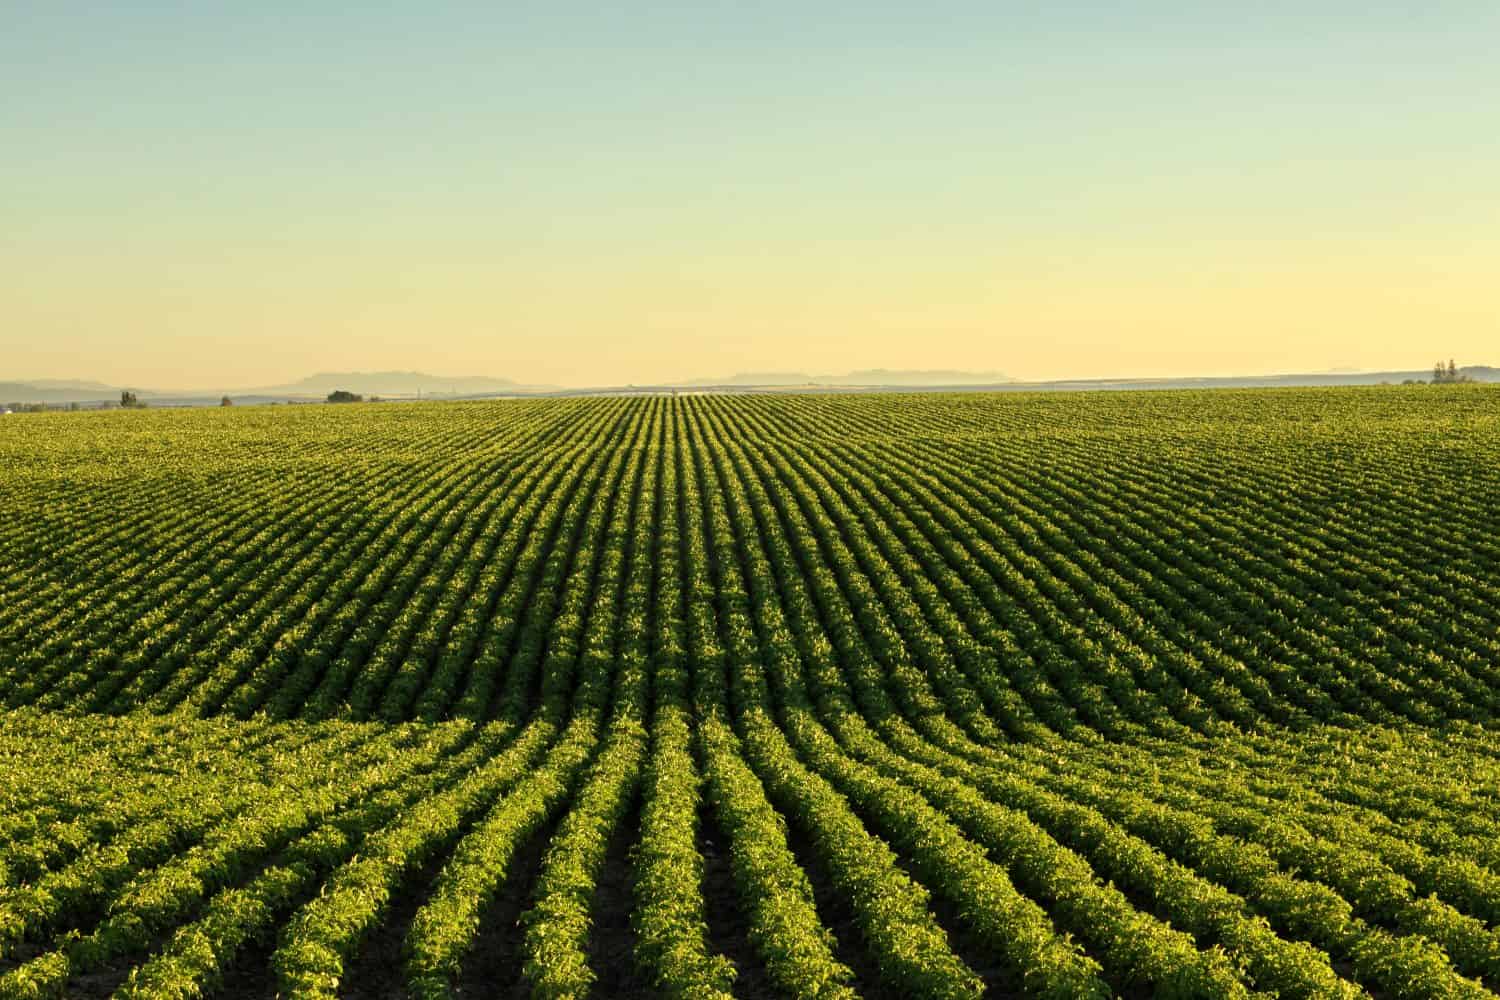 An early morning view of the rows in a field of potatoes in the rolling fertile farm fields of Idaho.